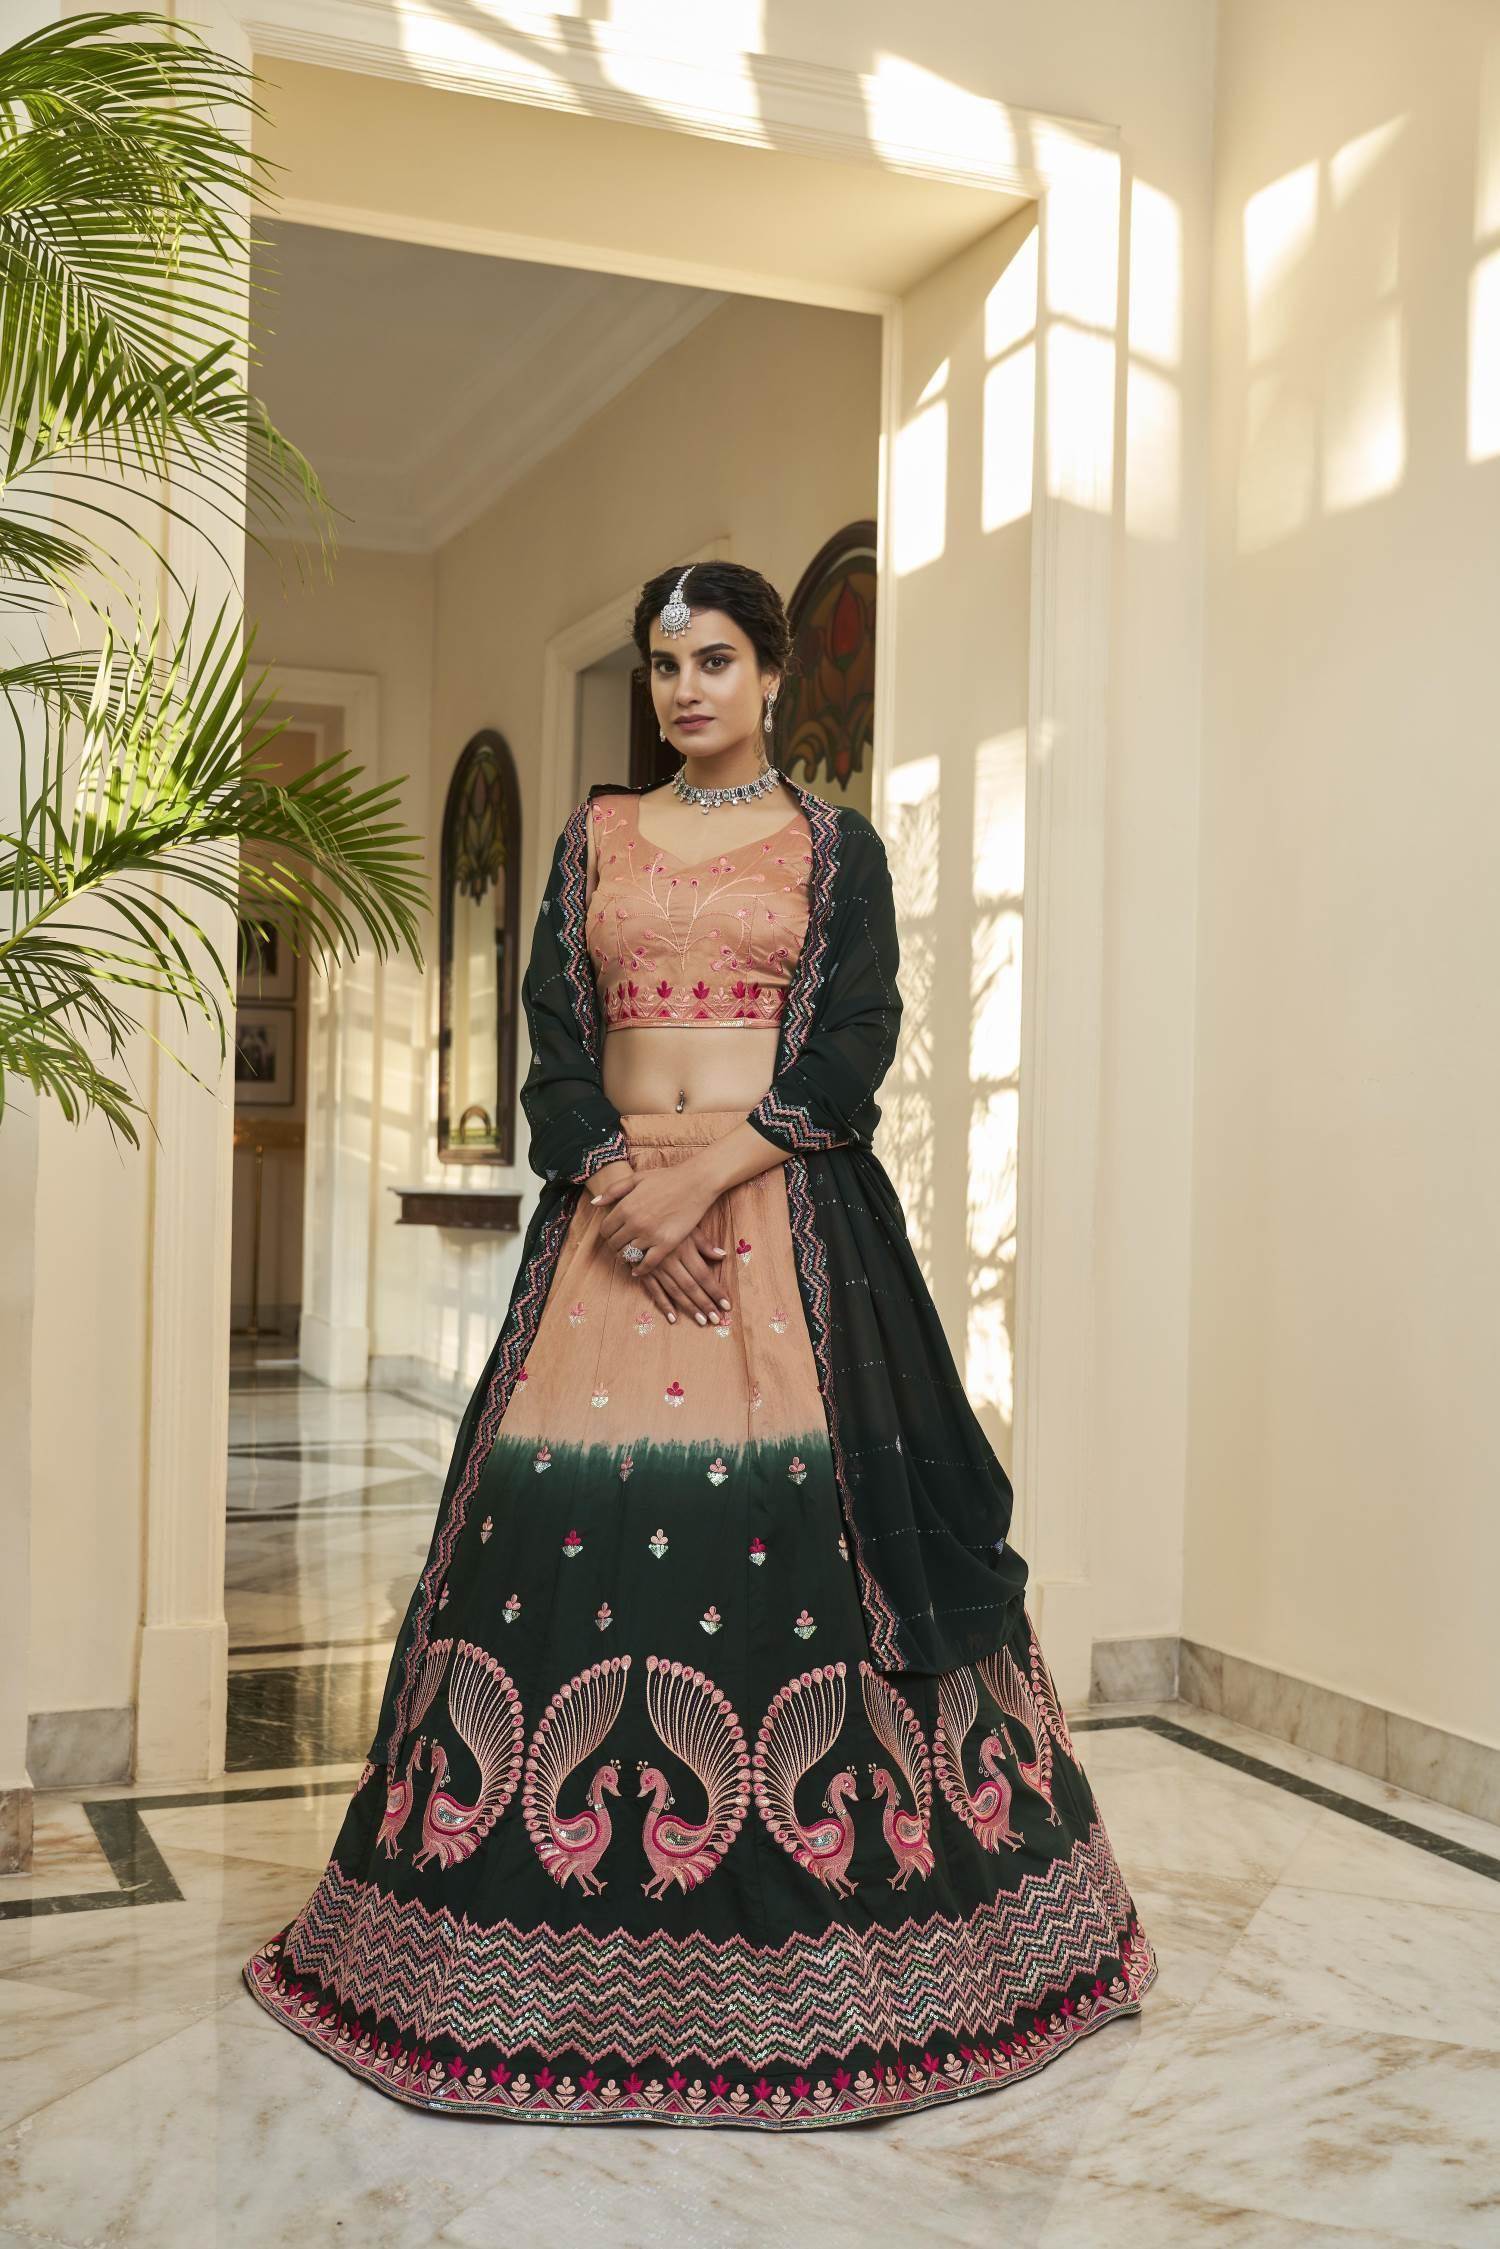 SwatiManish Lehengas SMF LEH 220 17 Bottle green lehenga with maroon sequin  dupatta and red thread… | Indian outfits lehenga, Green lehenga, Indian  designer outfits